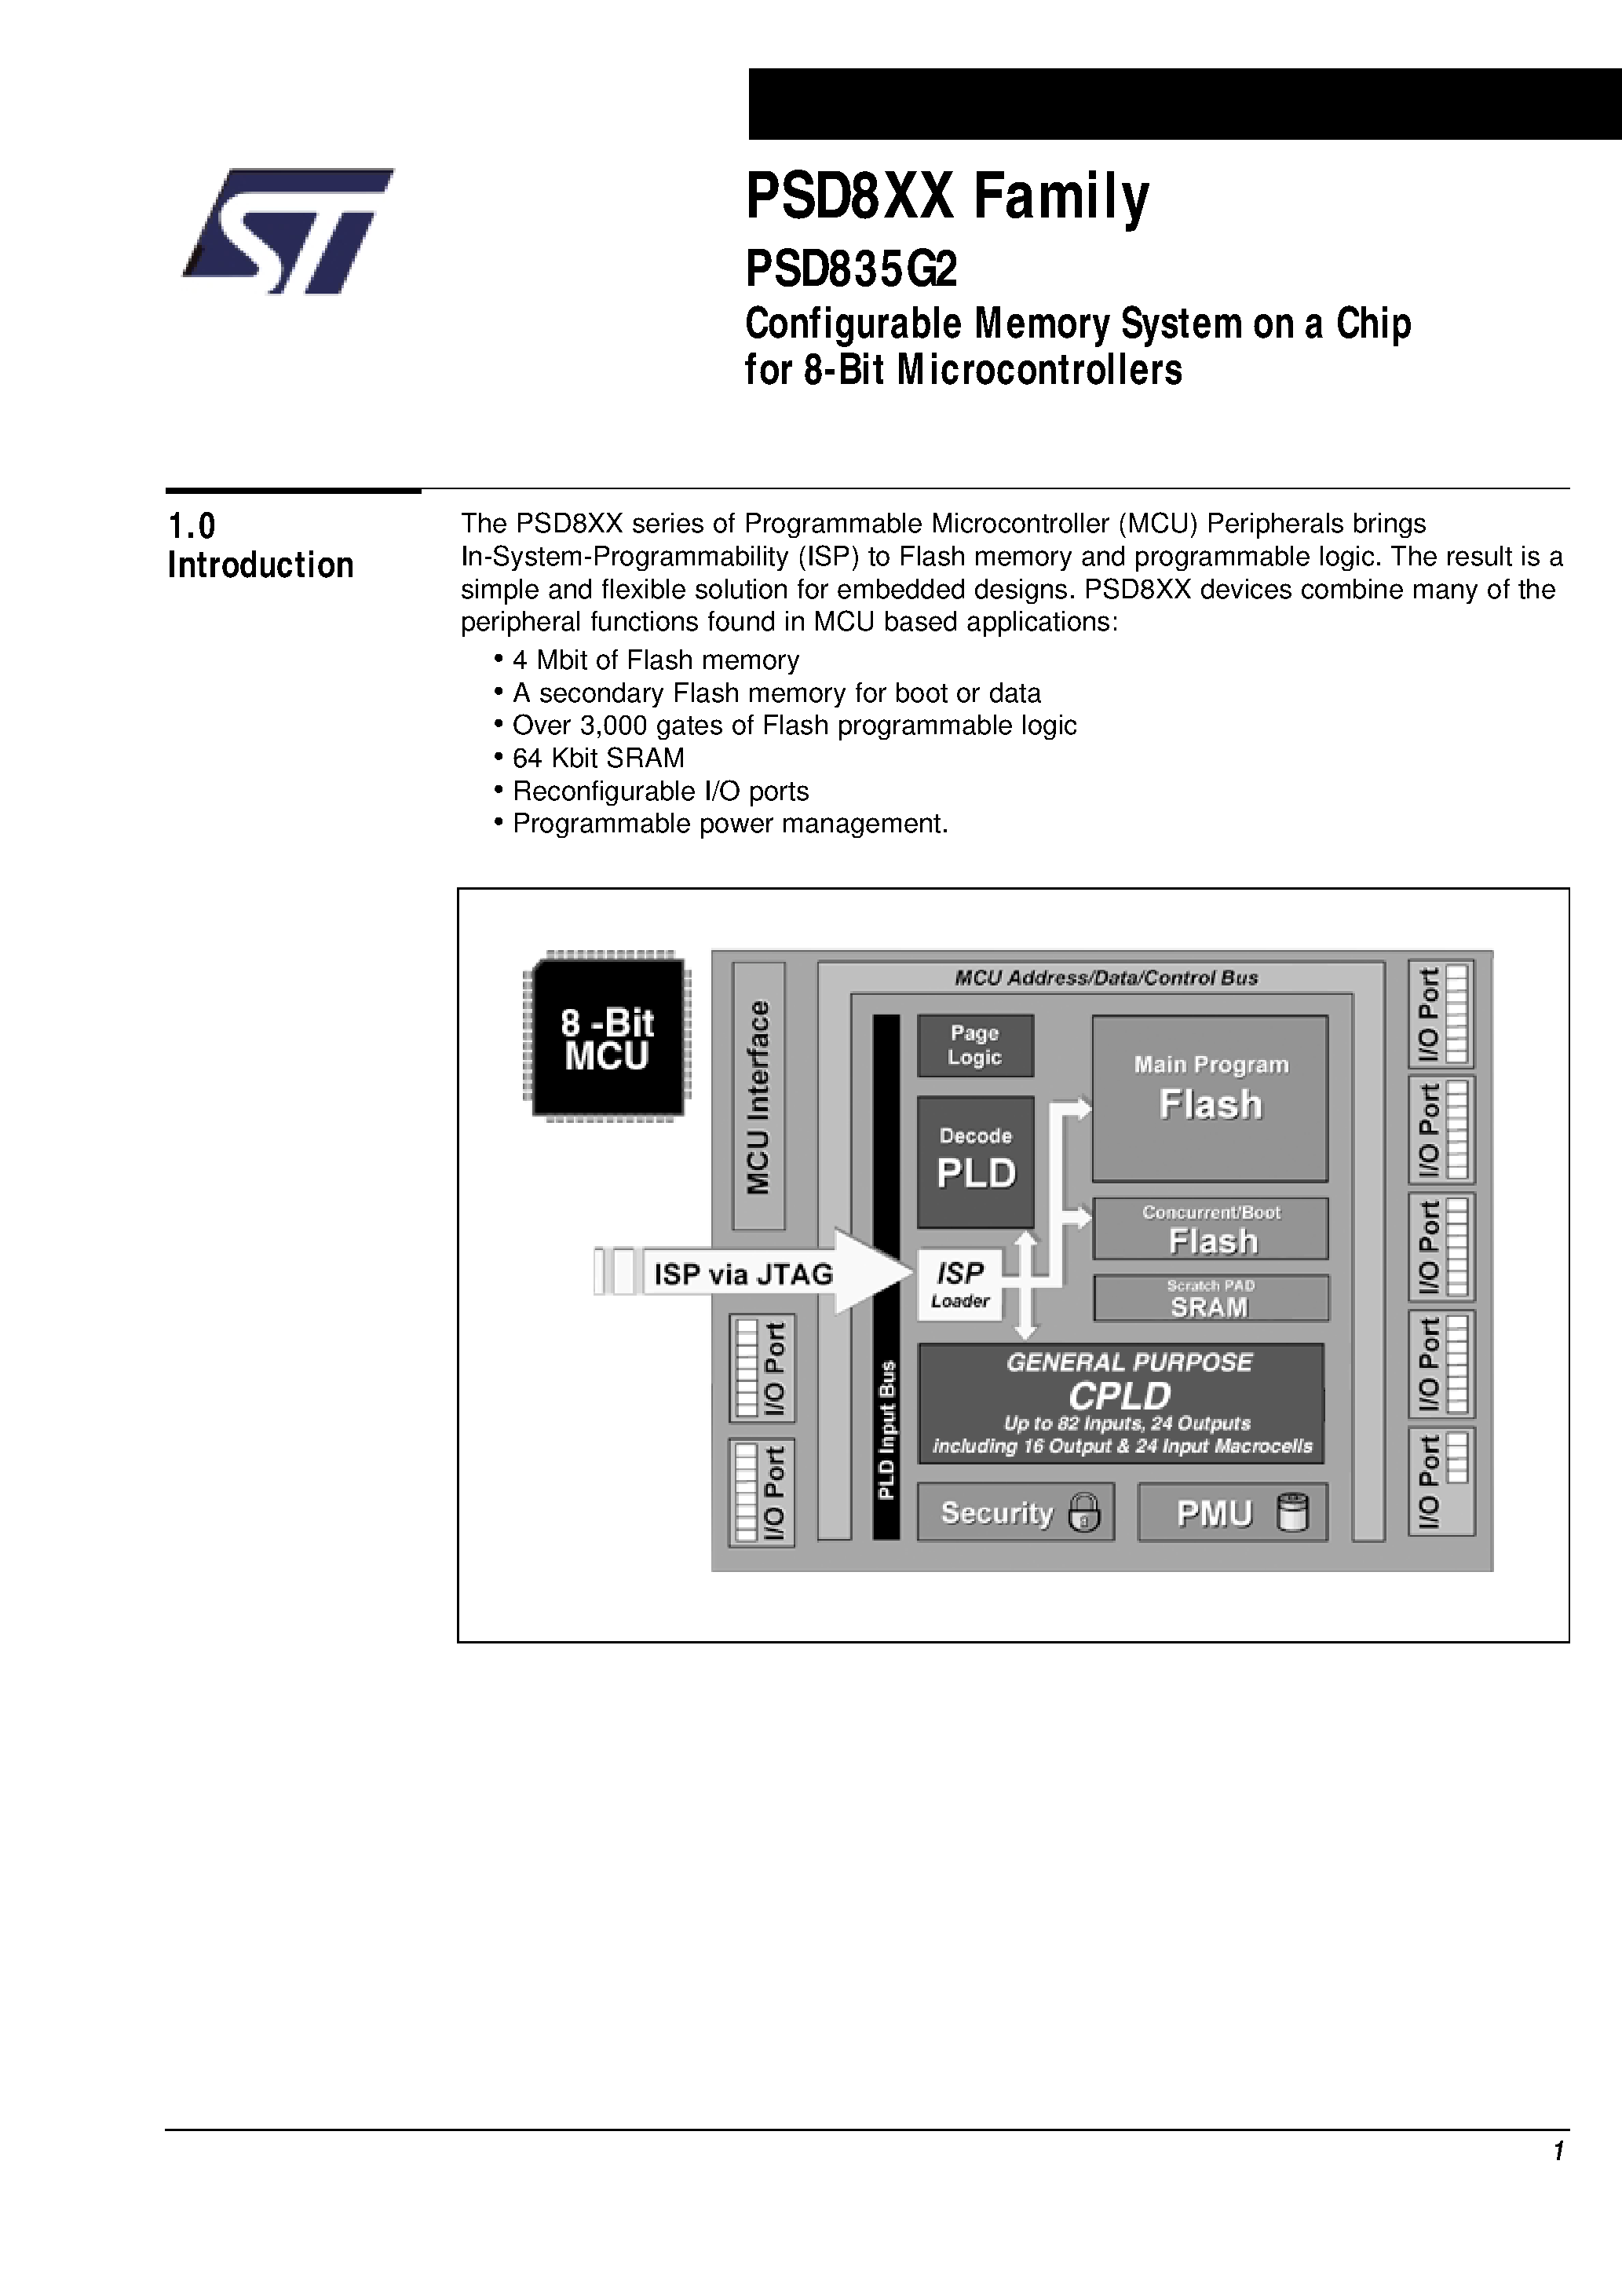 Datasheet PSD835F1V-A-70J - Configurable Memory System on a Chip for 8-Bit Microcontrollers page 2